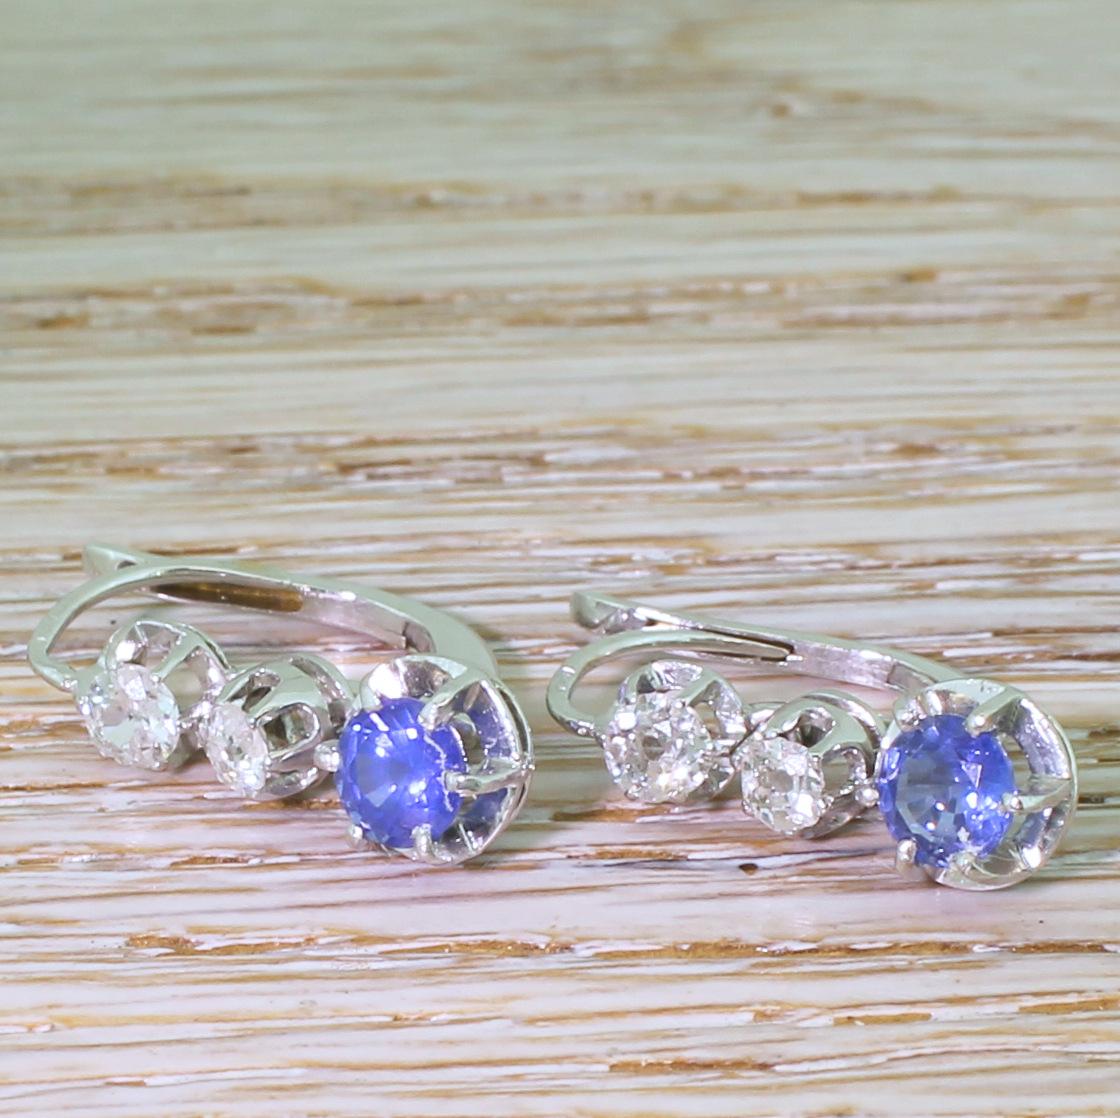 Highly beautiful vintage sapphire and diamond earrings. Each earrings holds two blindingly bright, colourless old cut diamonds leading – via an articulated drop – to a glowing, cornflower blue sapphire. All the gems are set in platinum, on a 18k